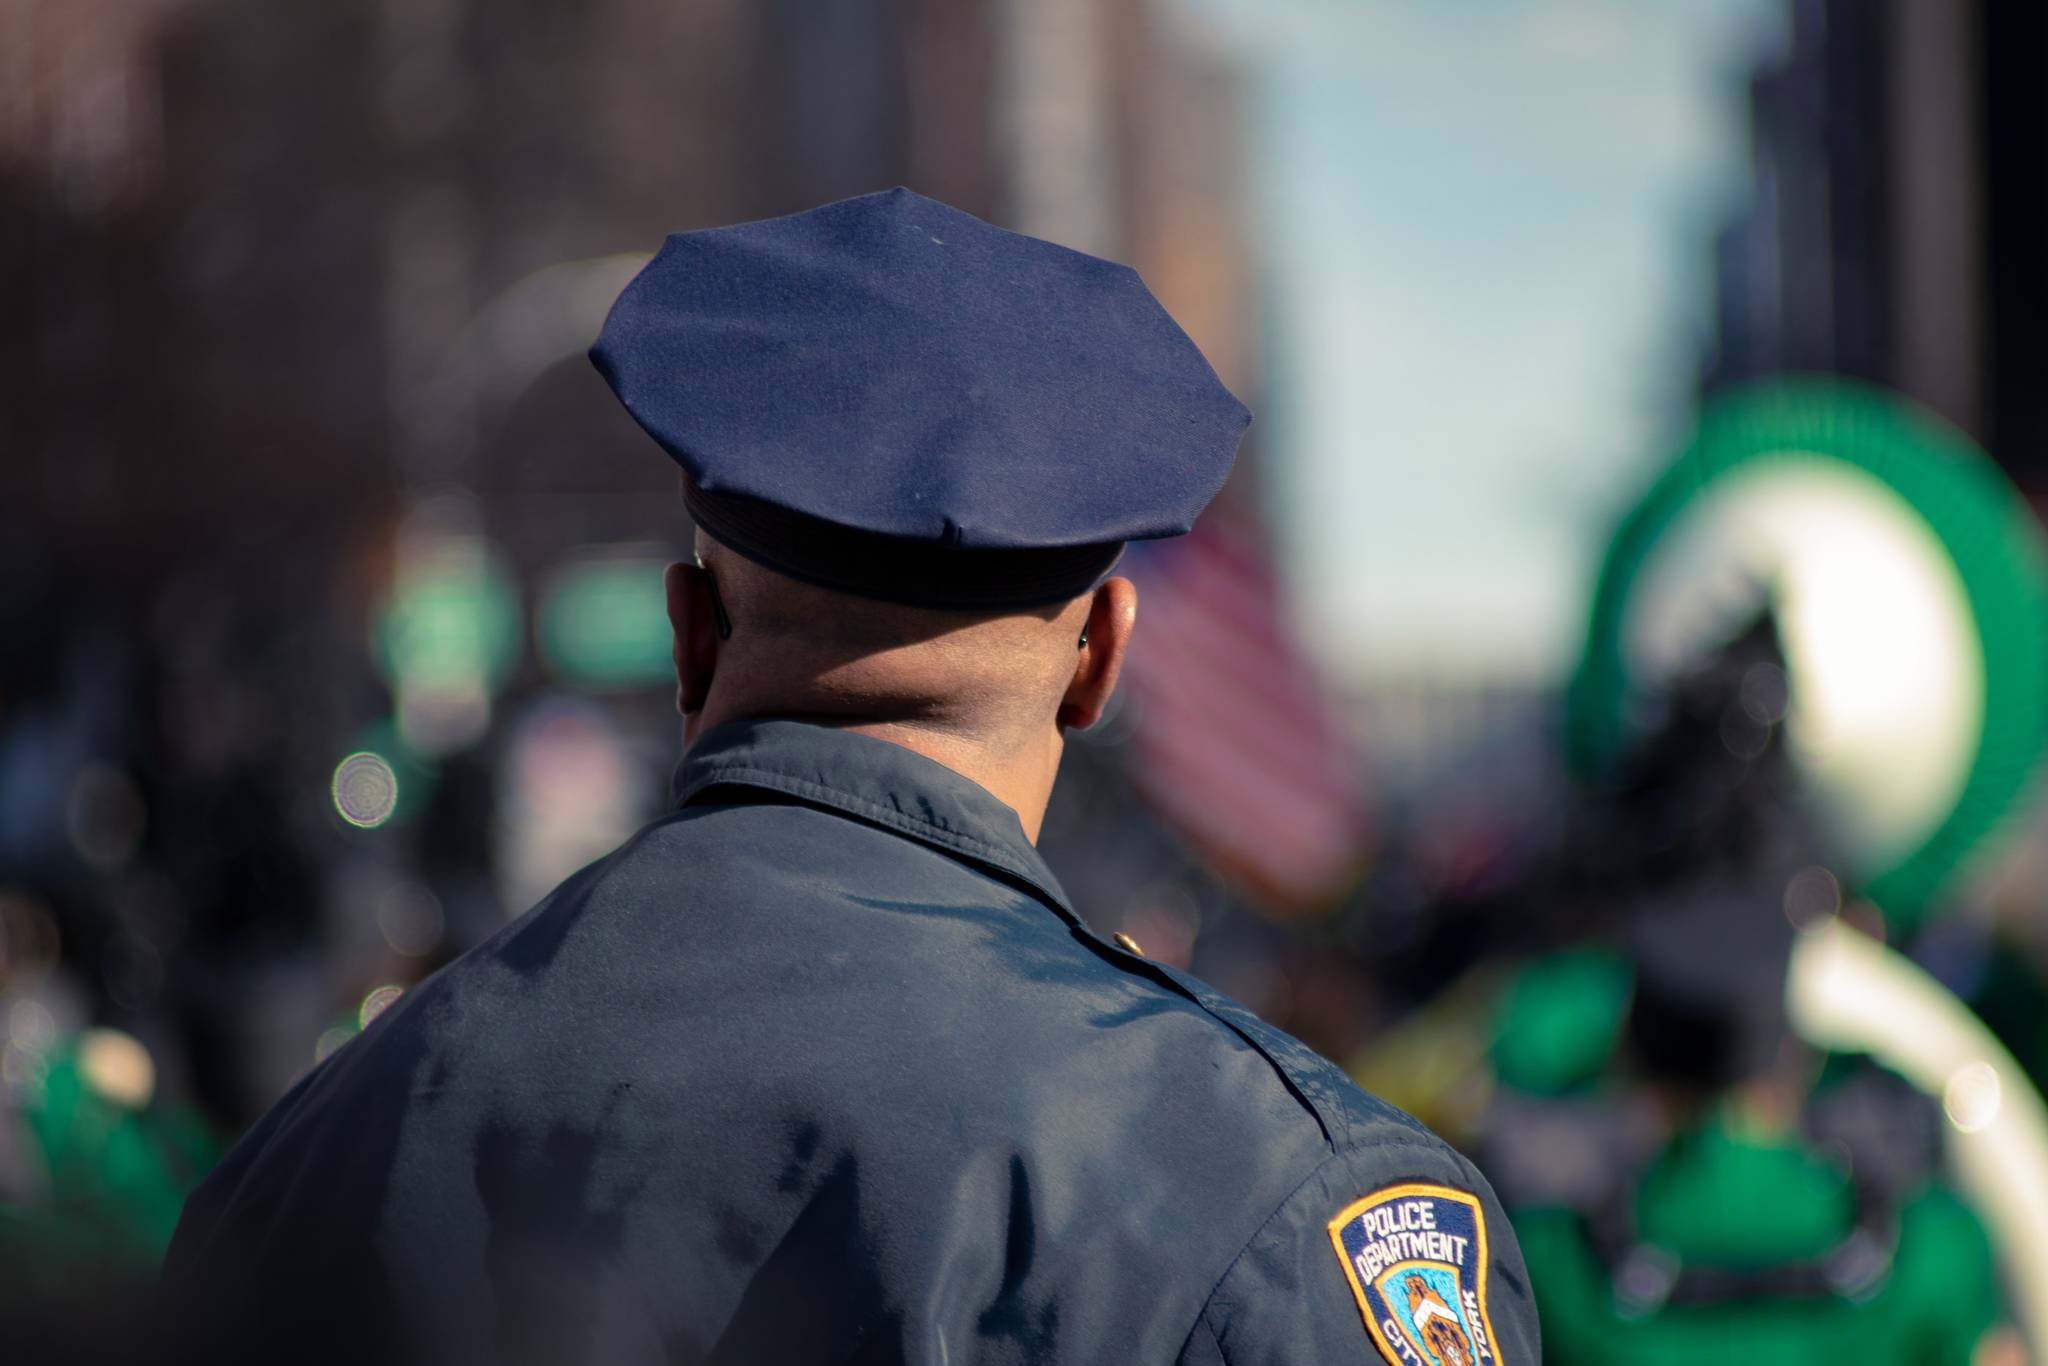 Opinion: Here’s why we shouldn’t defund the police